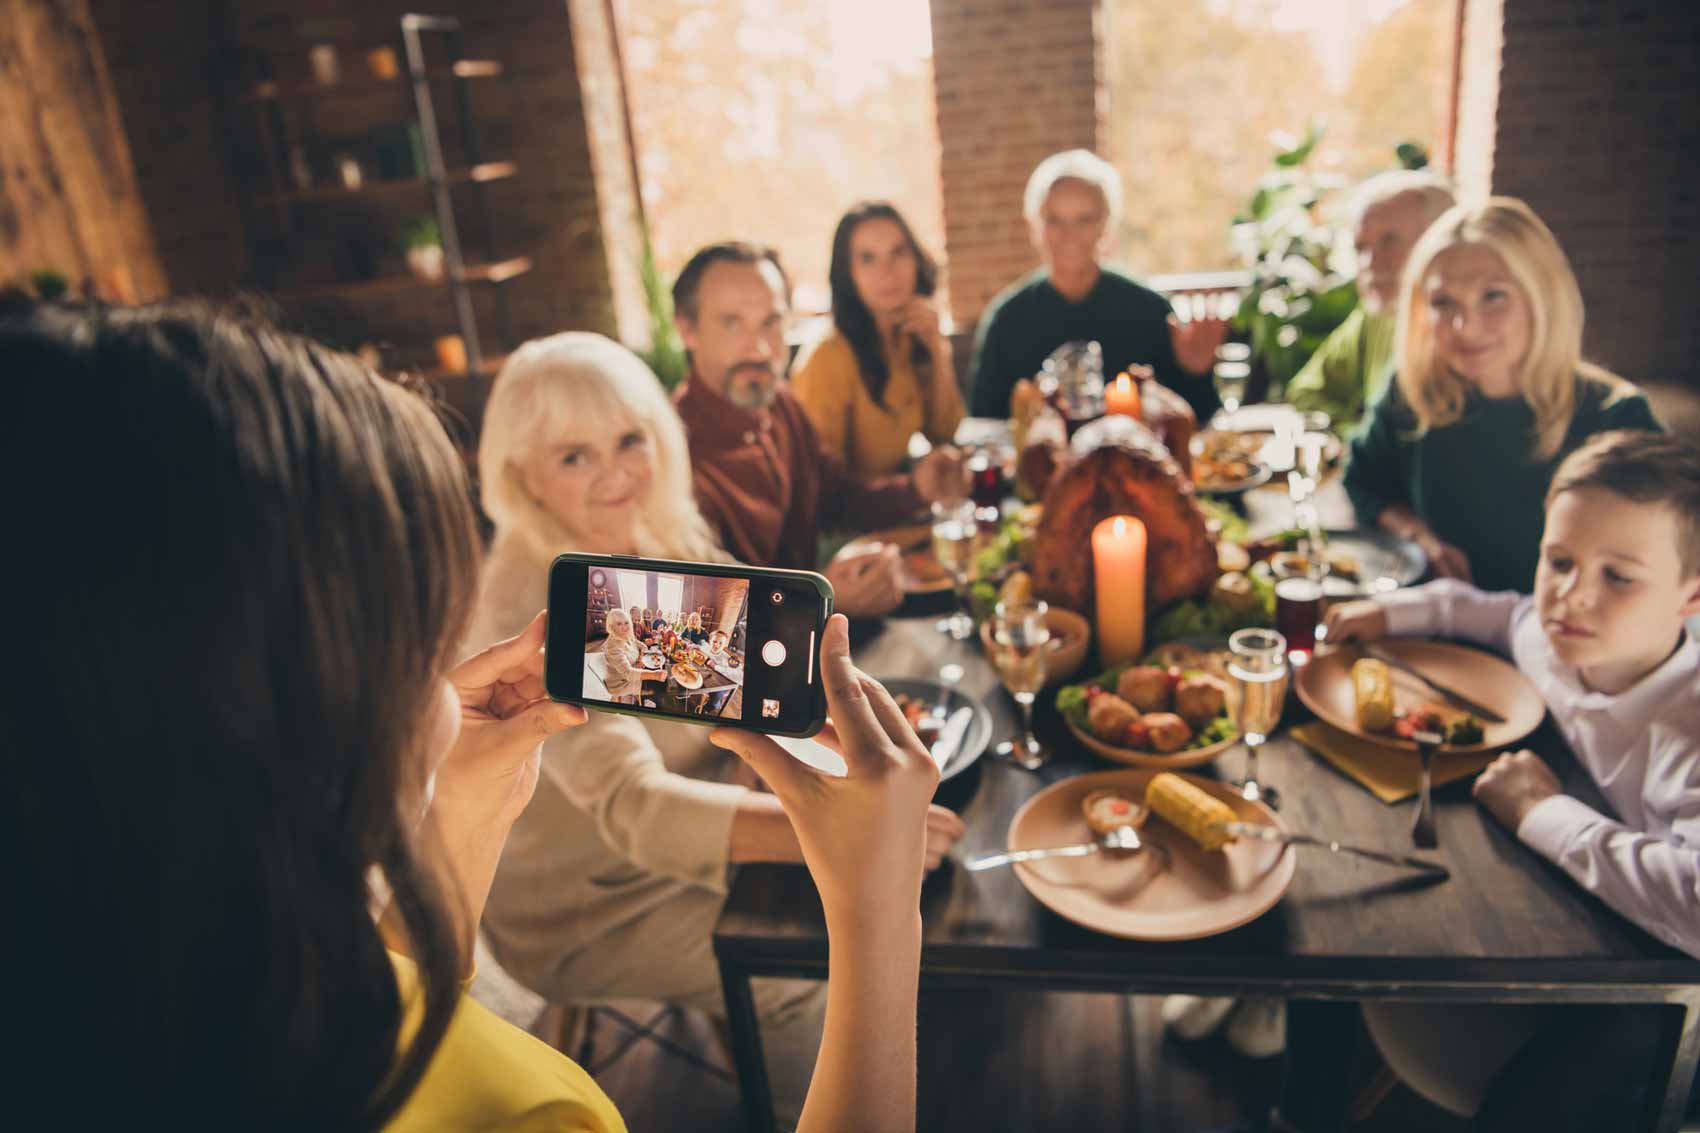 Image of a woman photographing a family at Thanksgiving dinner on her phone